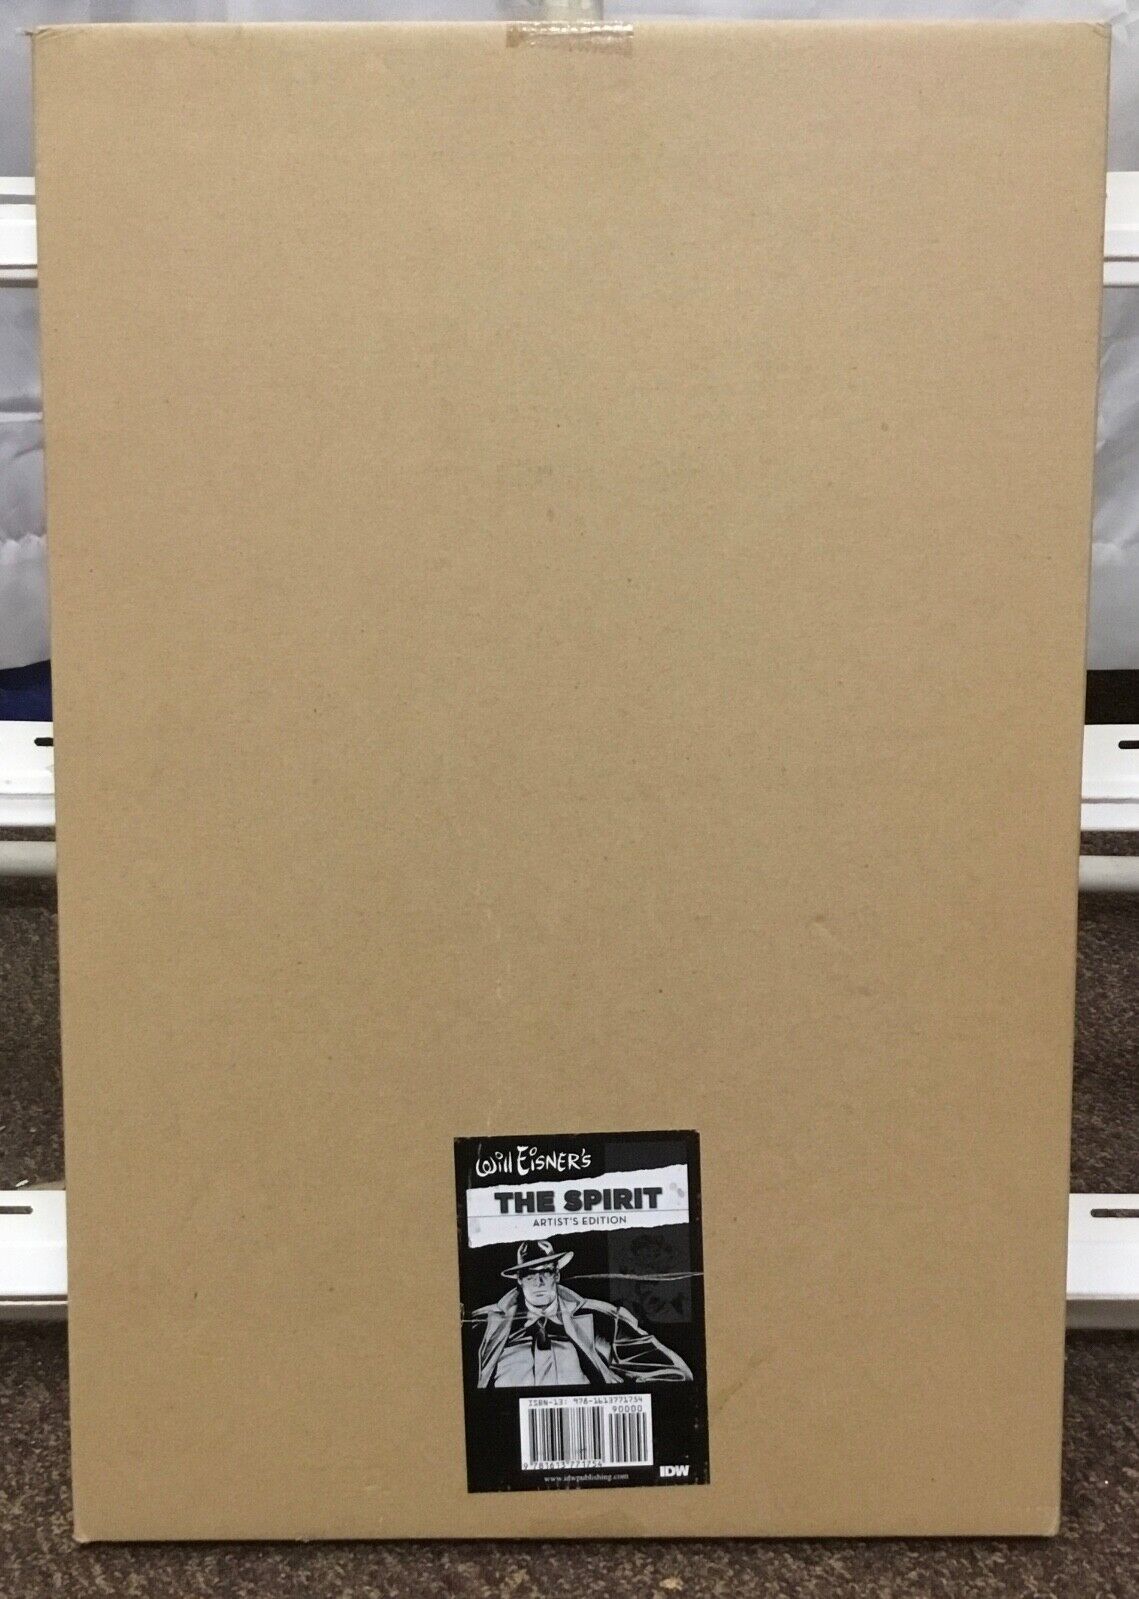 IDW Publishing Will Eisner’s The Spirit Artist’s Edition - New & Sealed